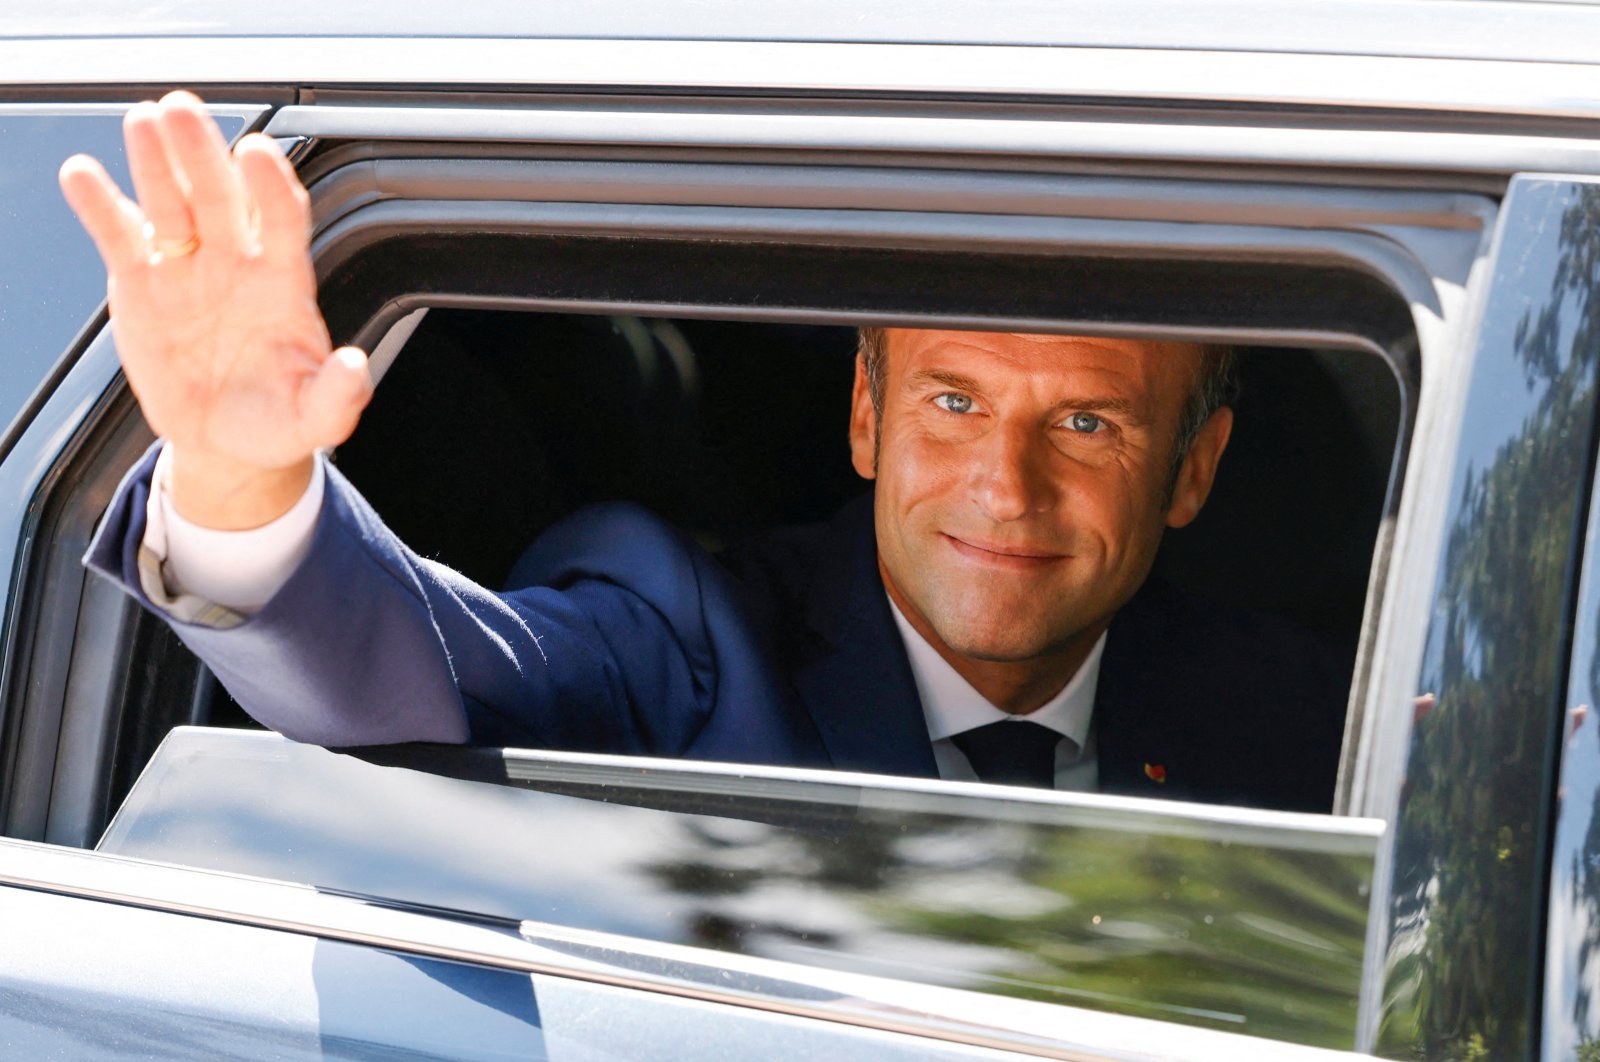 French President Emmanuel Macron waves as he votes in the first round of French parliamentary elections, at a polling station in Le Touquet, France, June 12, 2022. (Reuters Photo)